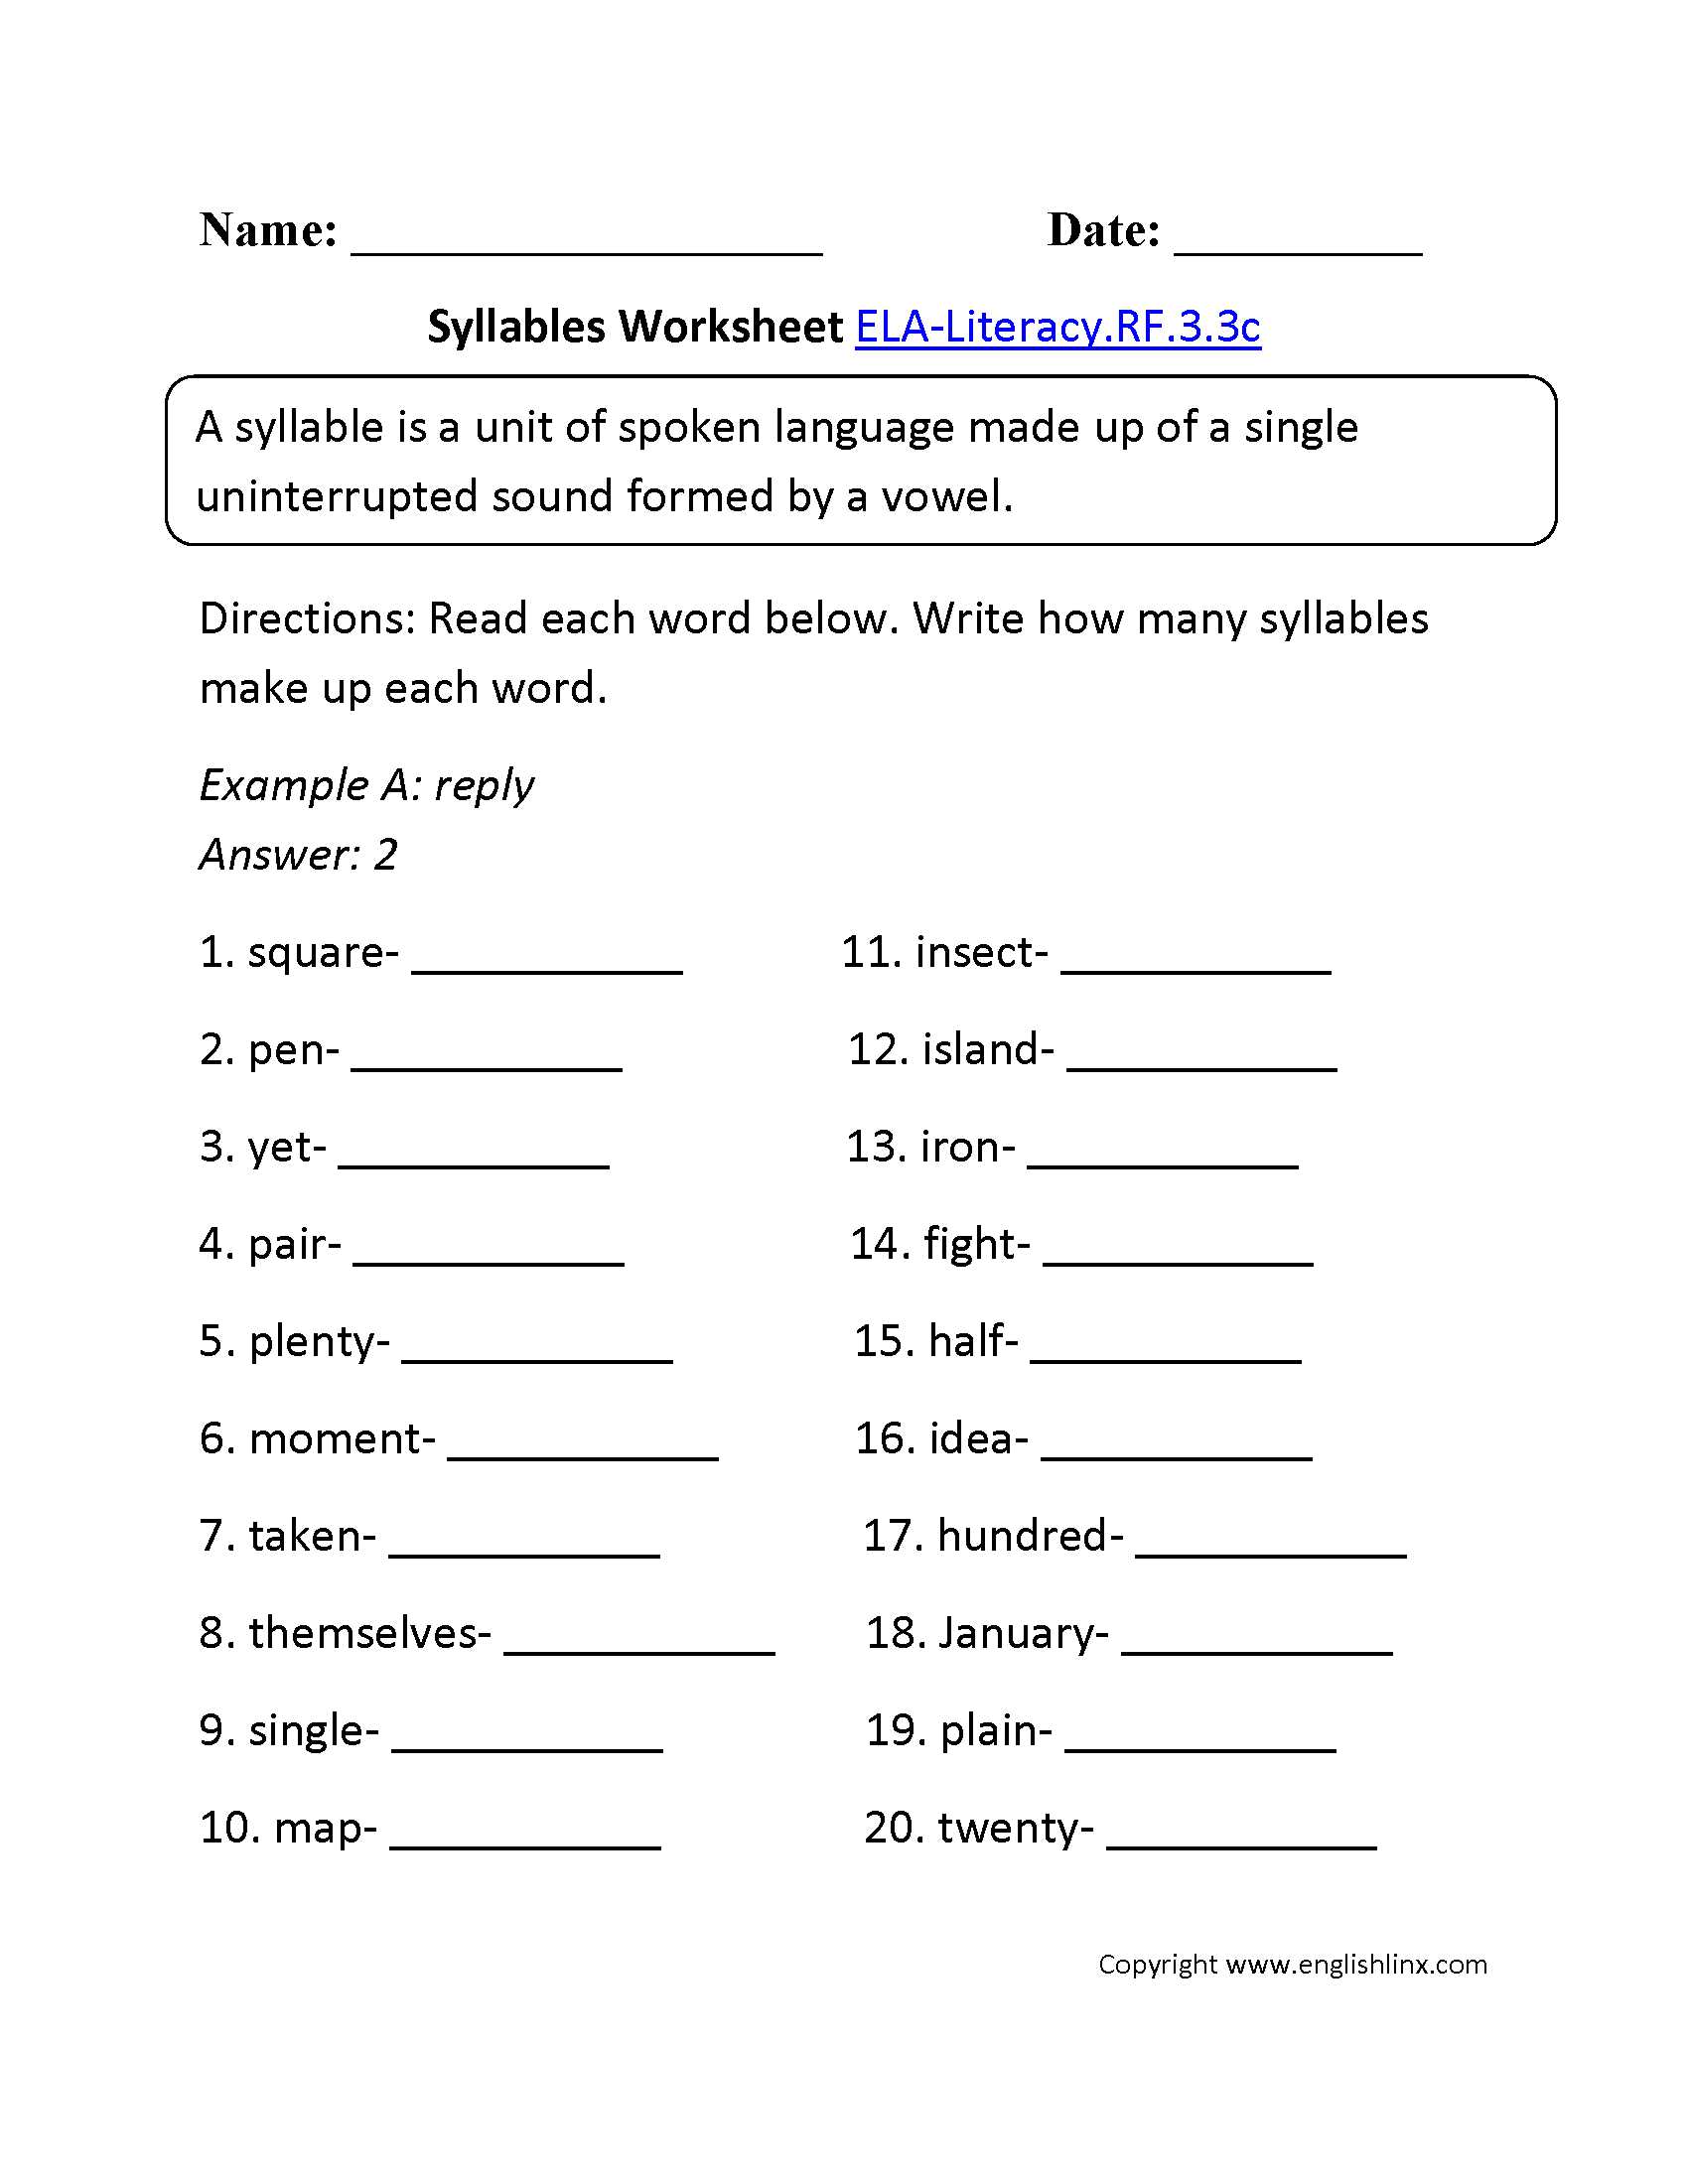 Phonics Worksheets Grade 1 as Well as 2nd Grade Printable Phonics Worksheets the Best Worksheets Image